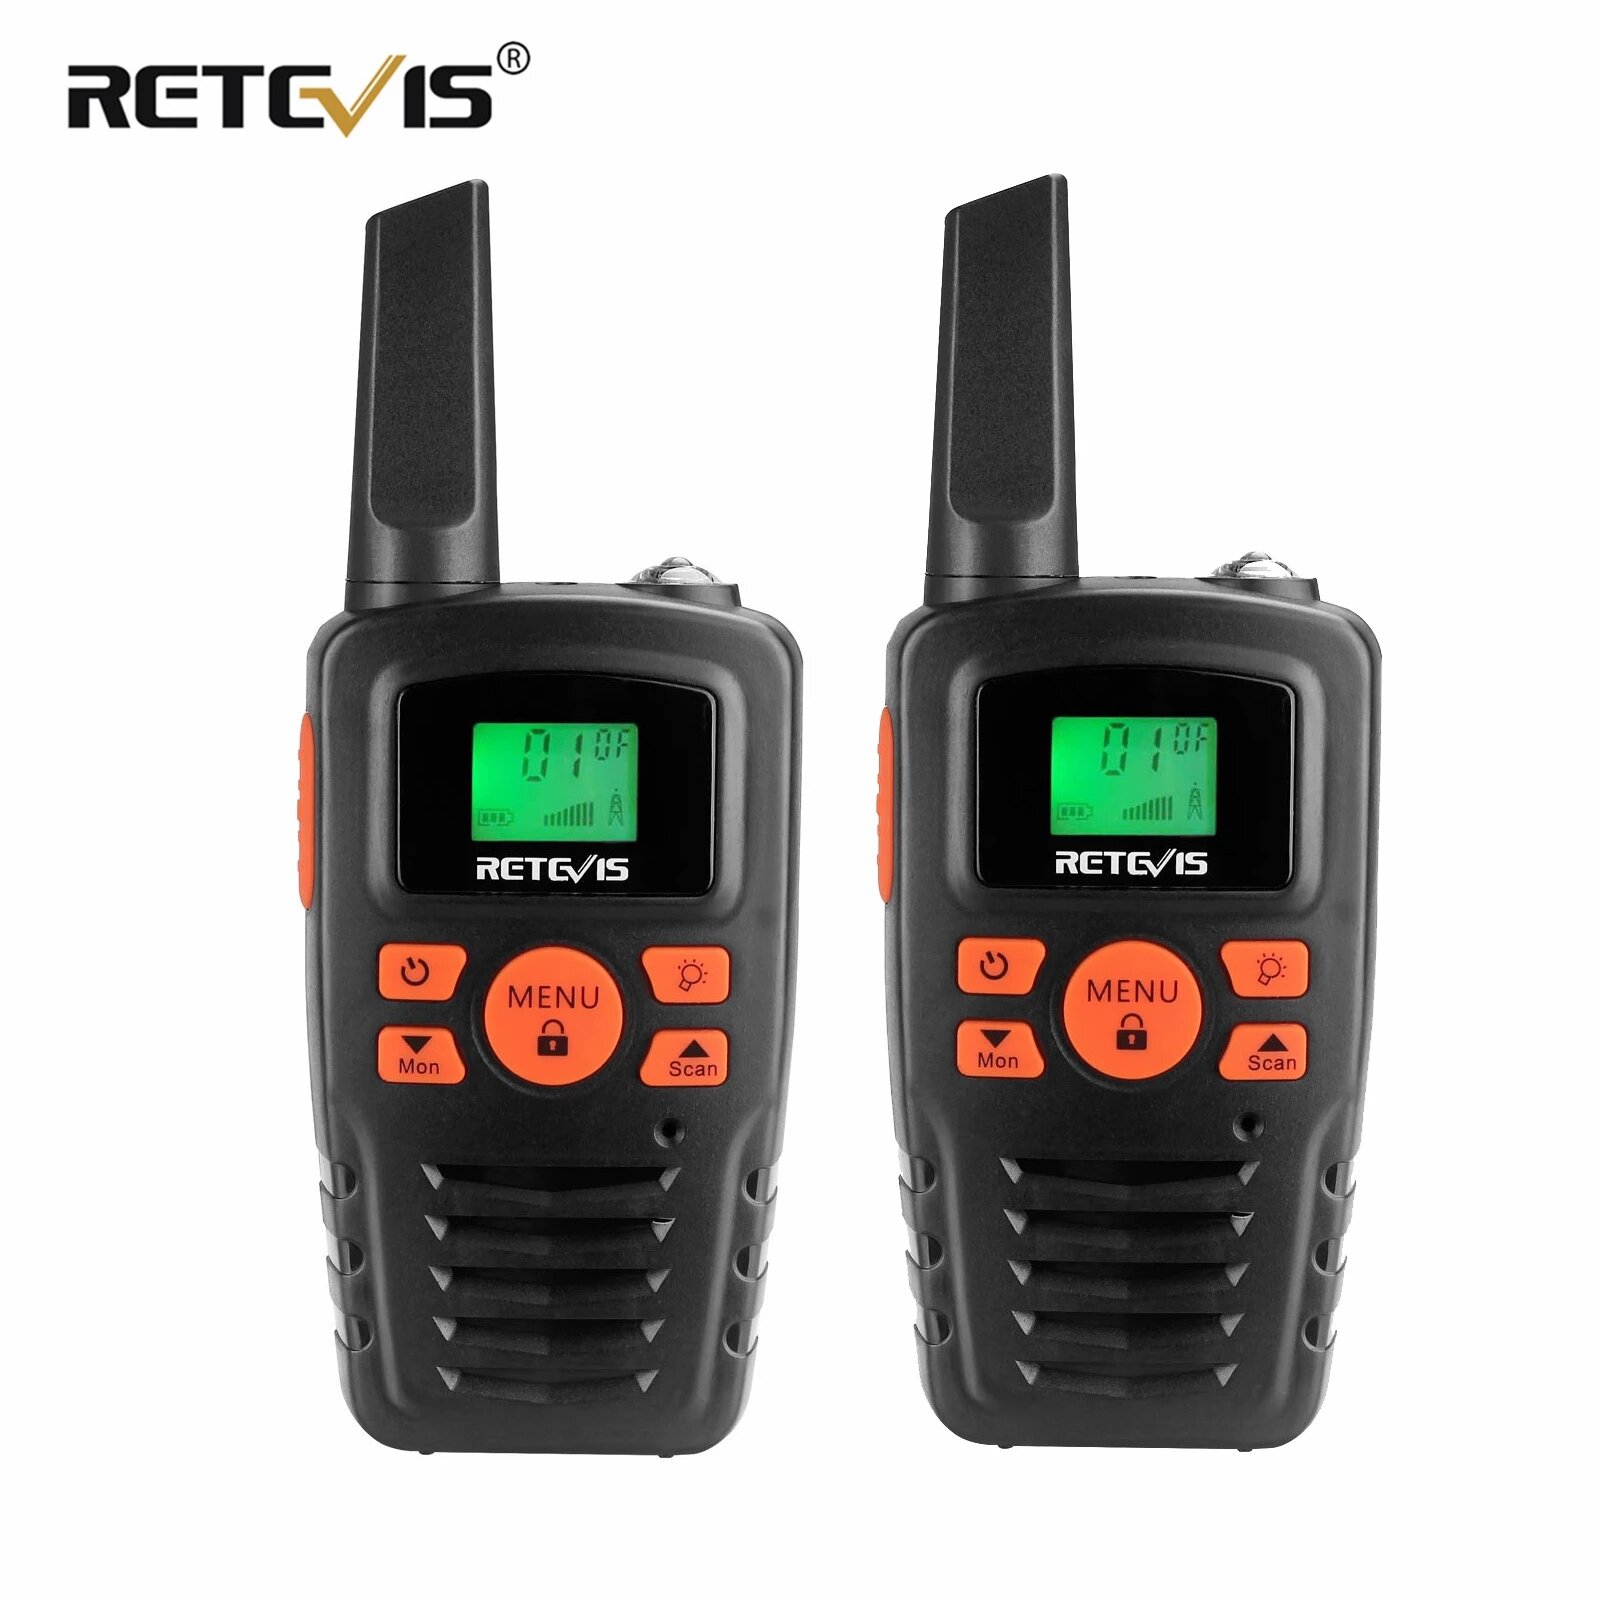 

2PCS Retevis RA35 FRS PMR Walkie Talkie Radio License-free 0.5W LED Flashlight VOXs Hands-free Two Way Radio for Outdoor